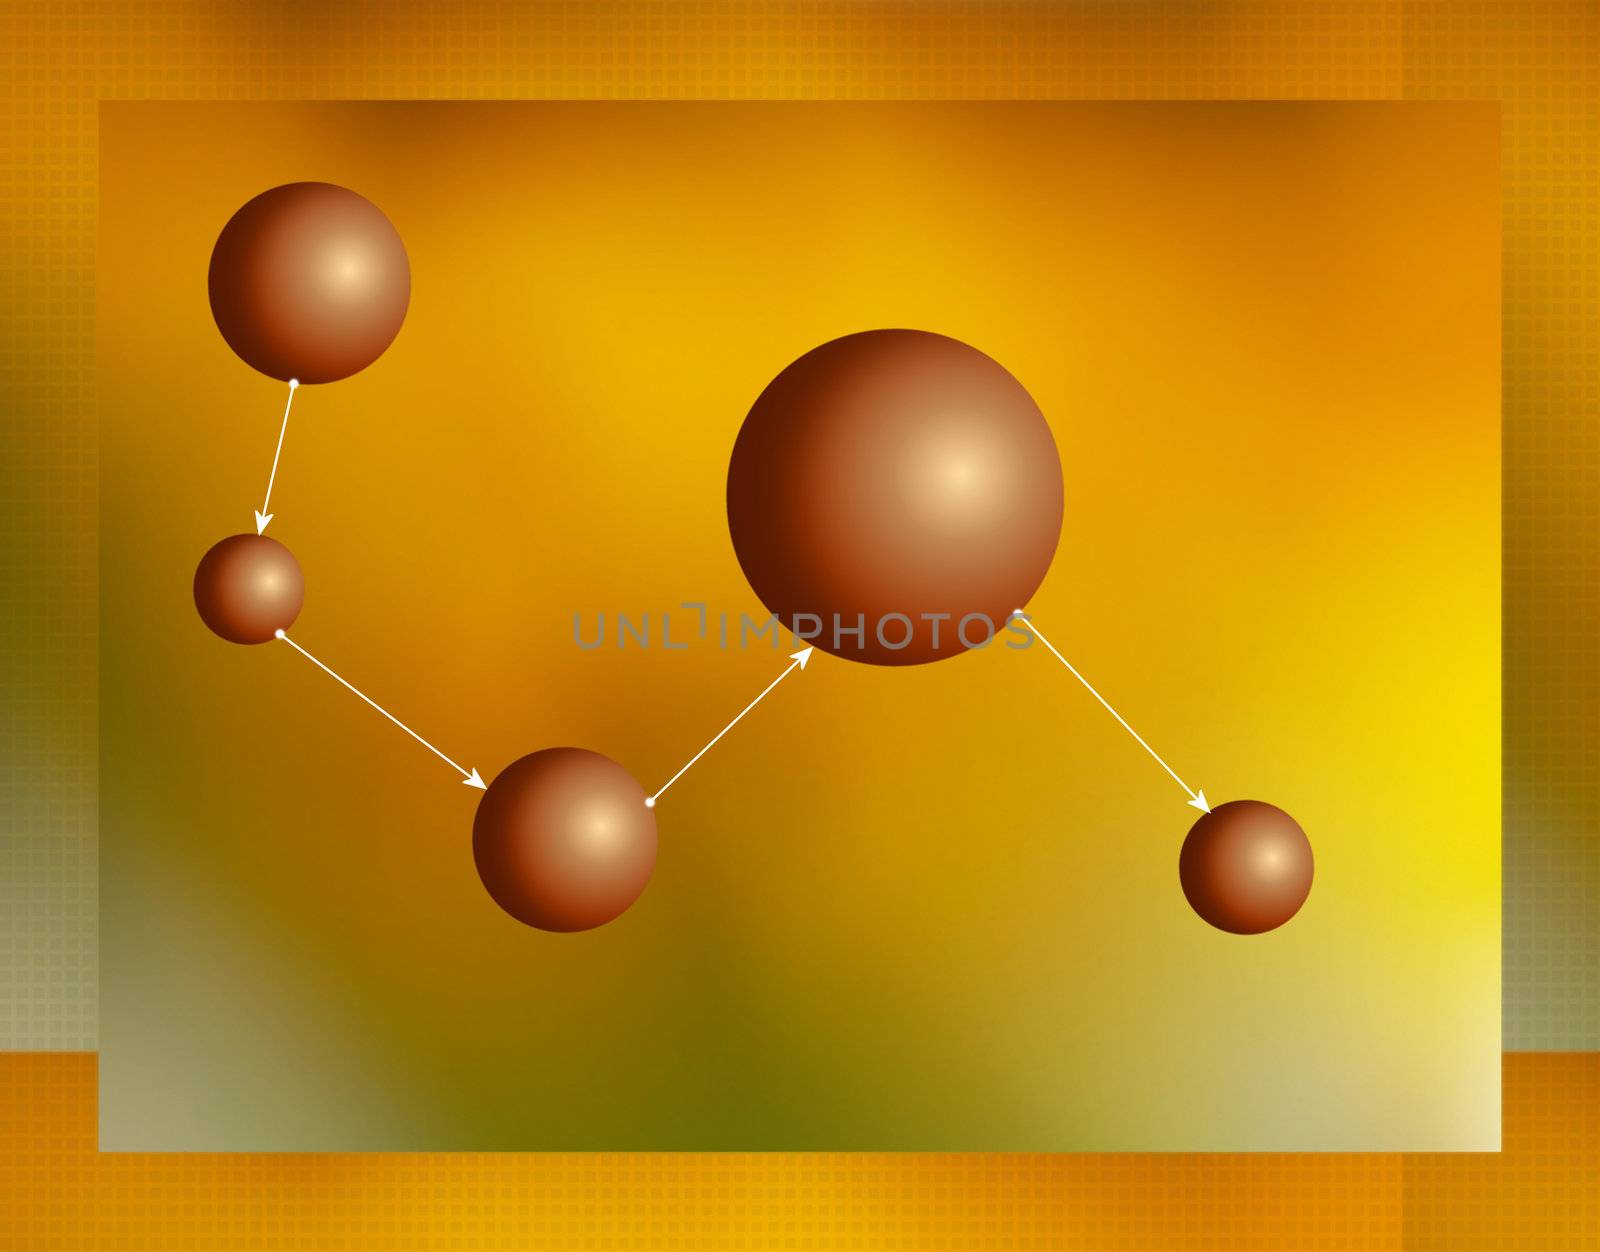 atom chain illustration with pointers by EveStock